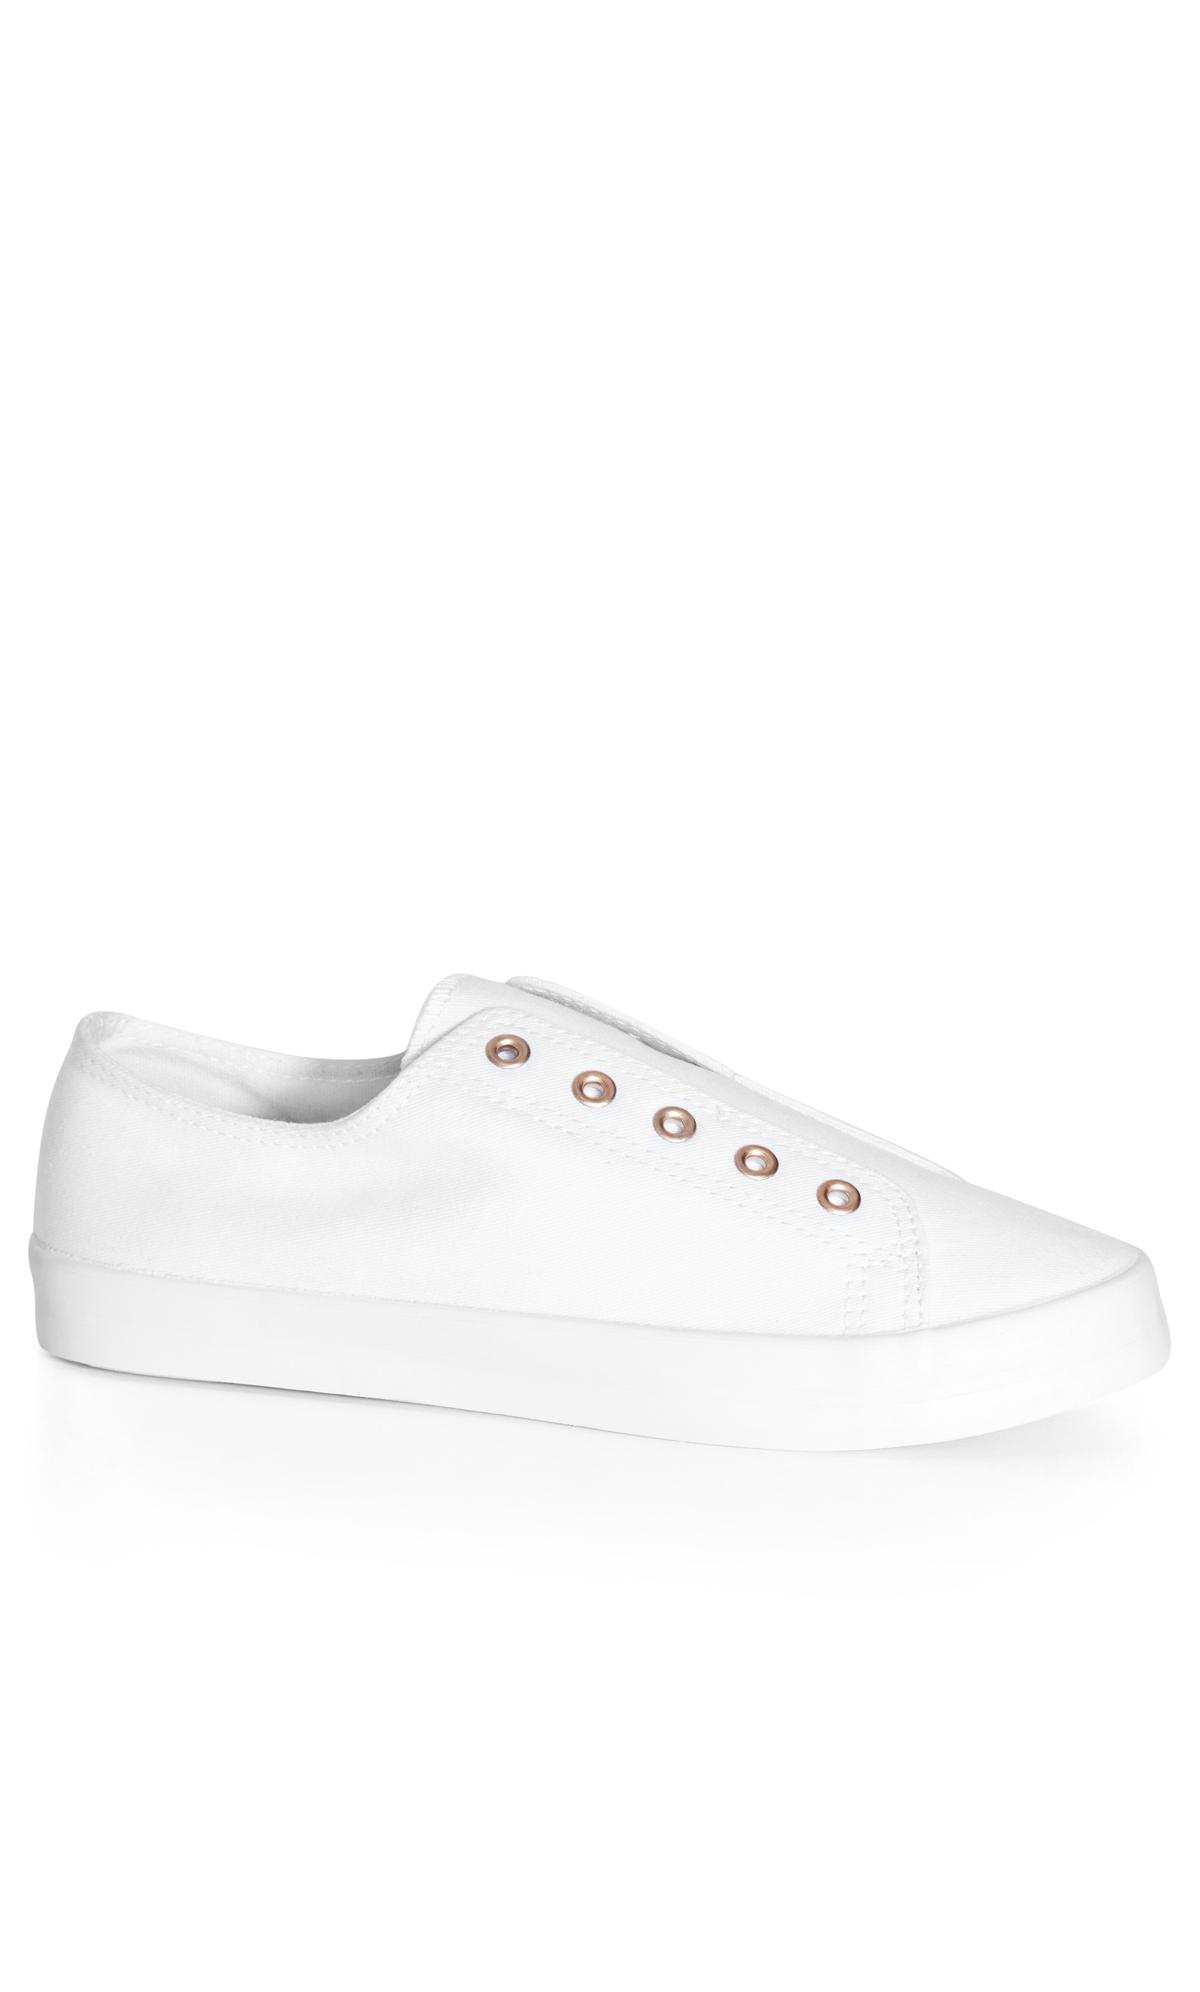 WIDE FIT Laceless Trainer - white | Evans